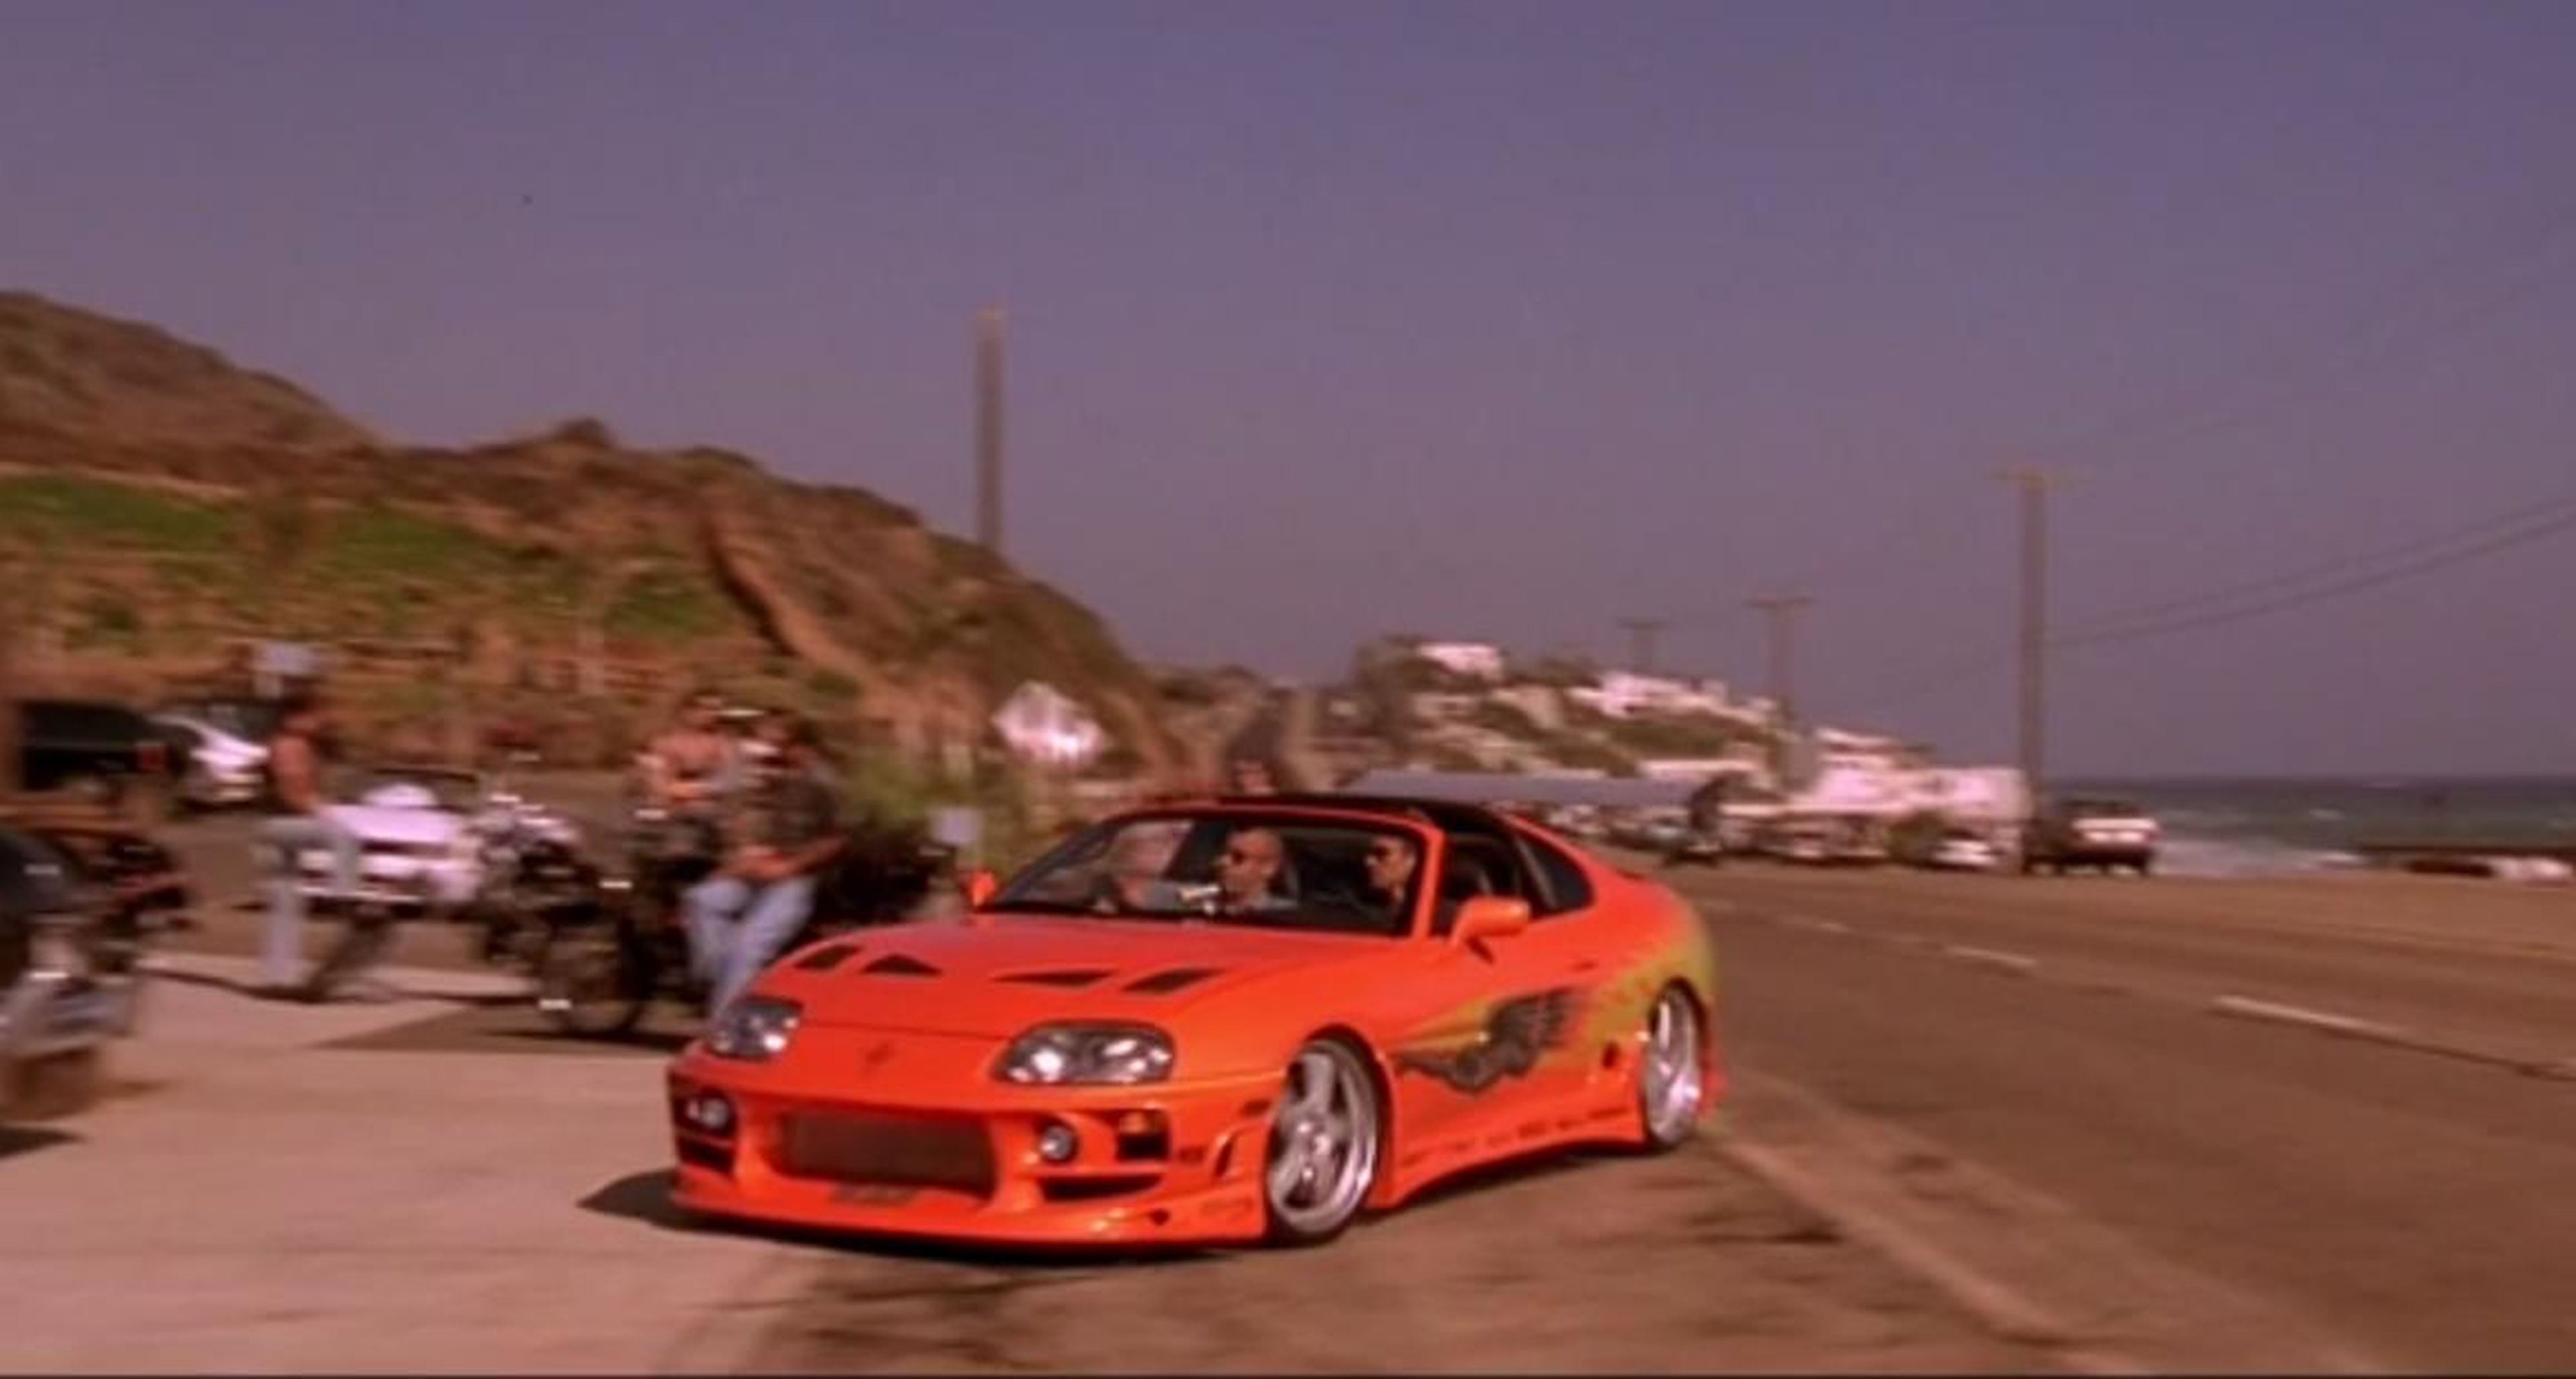 The old MK IV Supra became a Hollywood legend thanks to the 'Fast and Furious' movies.